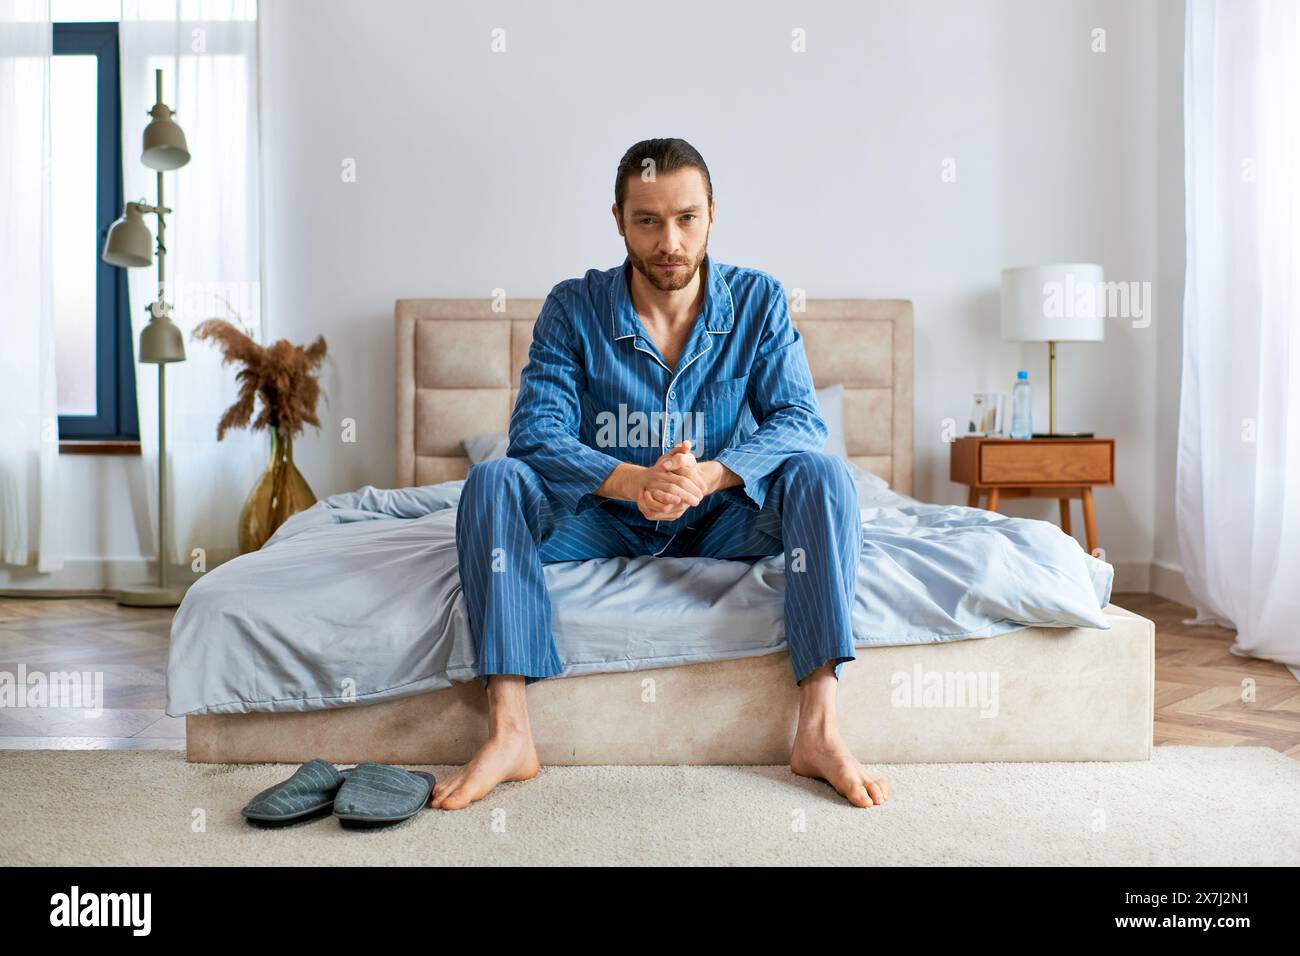 Handsome man in pajamas on top of a bed. Stock Photo